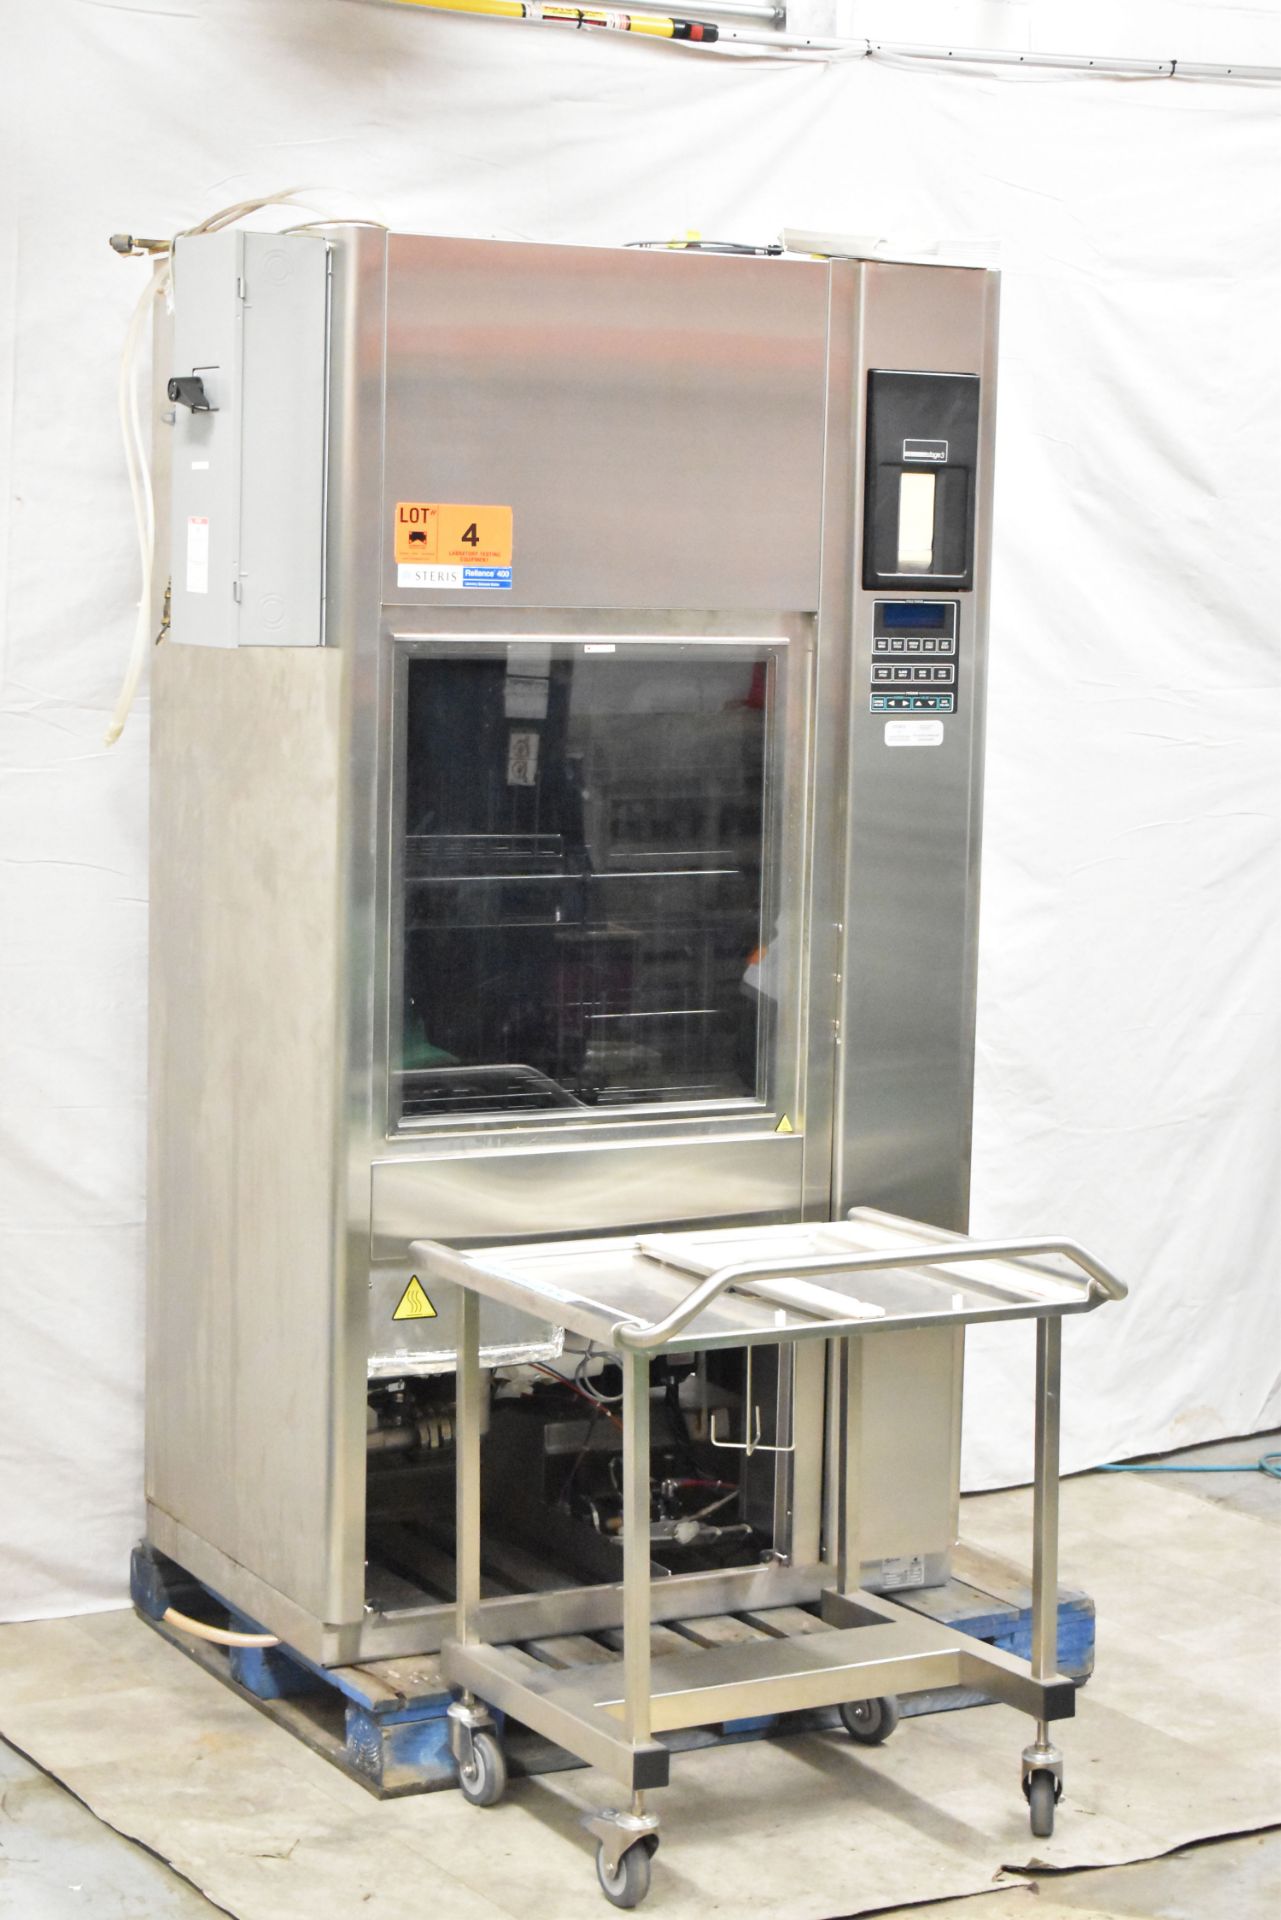 STERIS (2007) RELIANCE 400 LABORATORY GLASSWARE WASHER WITH DIGITAL TOUCH SCREEN CONTROL, THERMAL